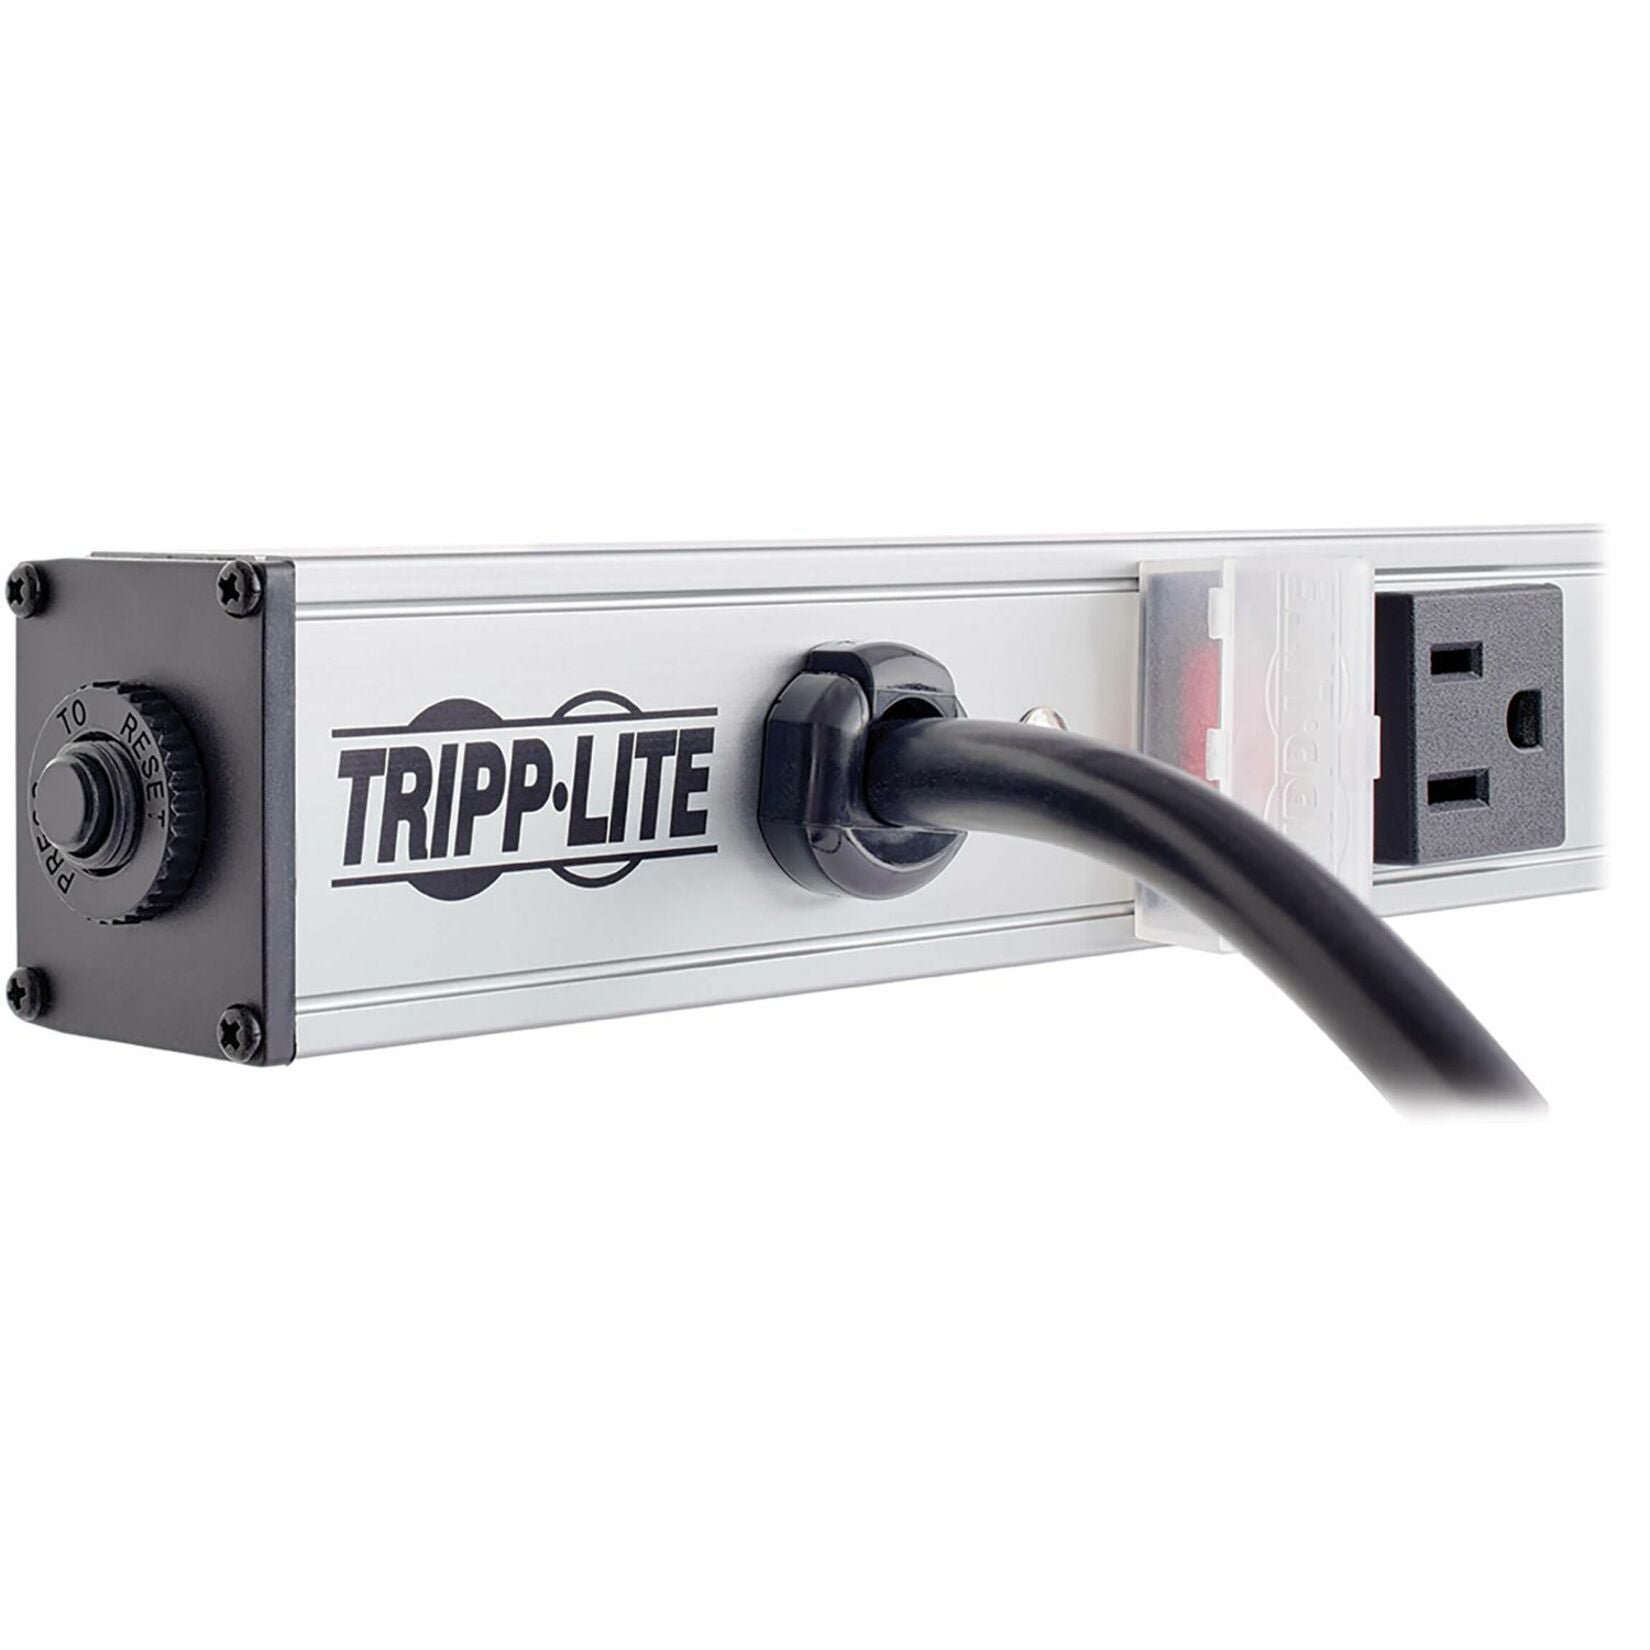 Tripp Lite PS6020 Power Strip 120V AC, 20 Outlet Strip, 15ft Cord, 60in Length, Switch Metal